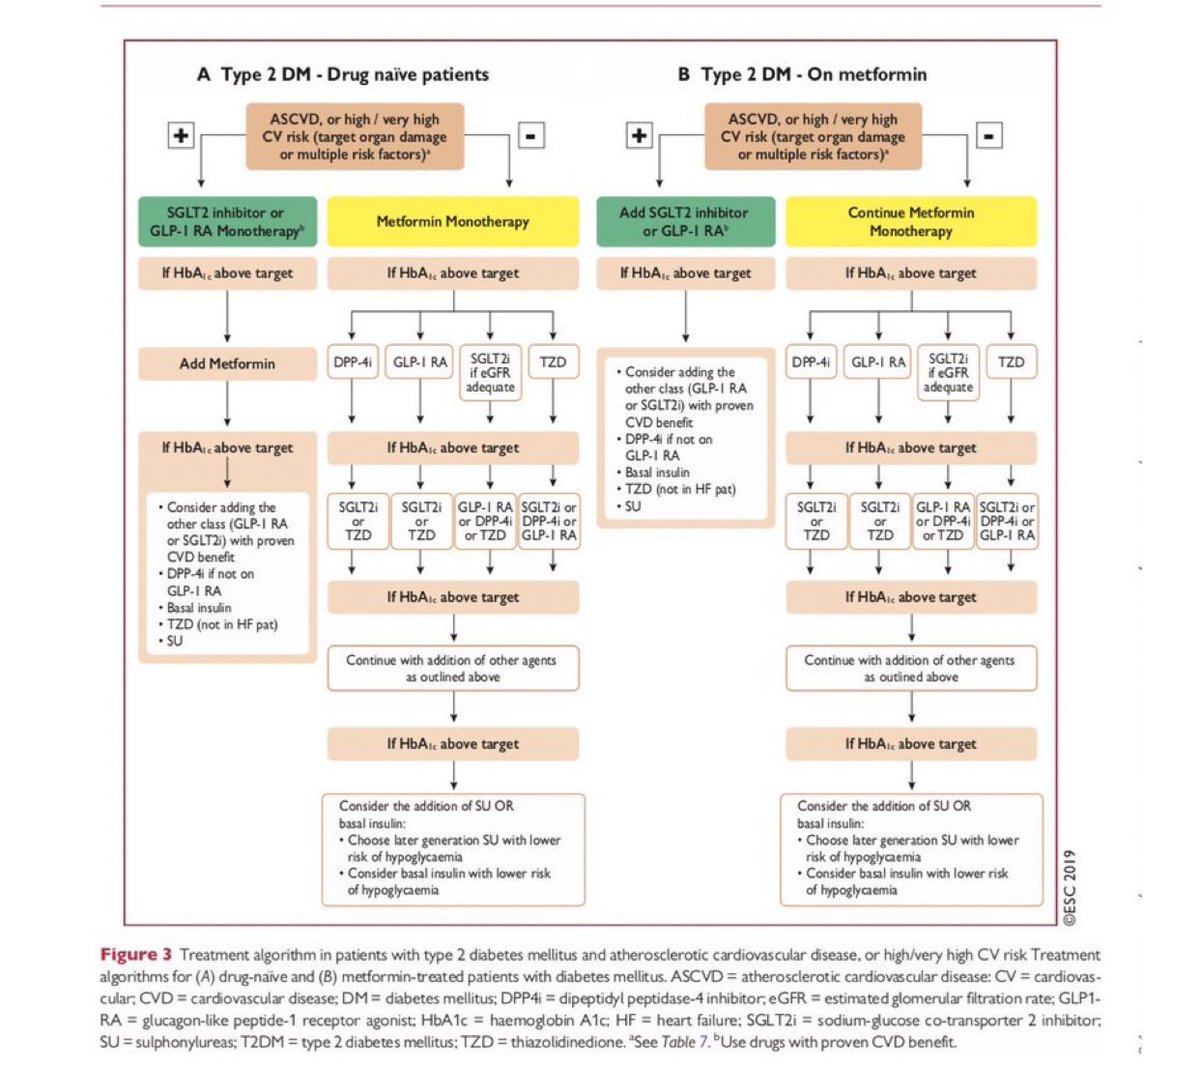 Somewhat controversially in 2019, the ESC broke rank with other guidelines and recommended SGLT2i/GLP-1RA in patients at very high CV risk “regardless of whether the are treatment naive or already receiving metformin”  https://www.escardio.org/Guidelines/Clinical-Practice-Guidelines/Diabetes-Pre-Diabetes-and-Cardiovascular-Diseases-developed-with-the-EASD